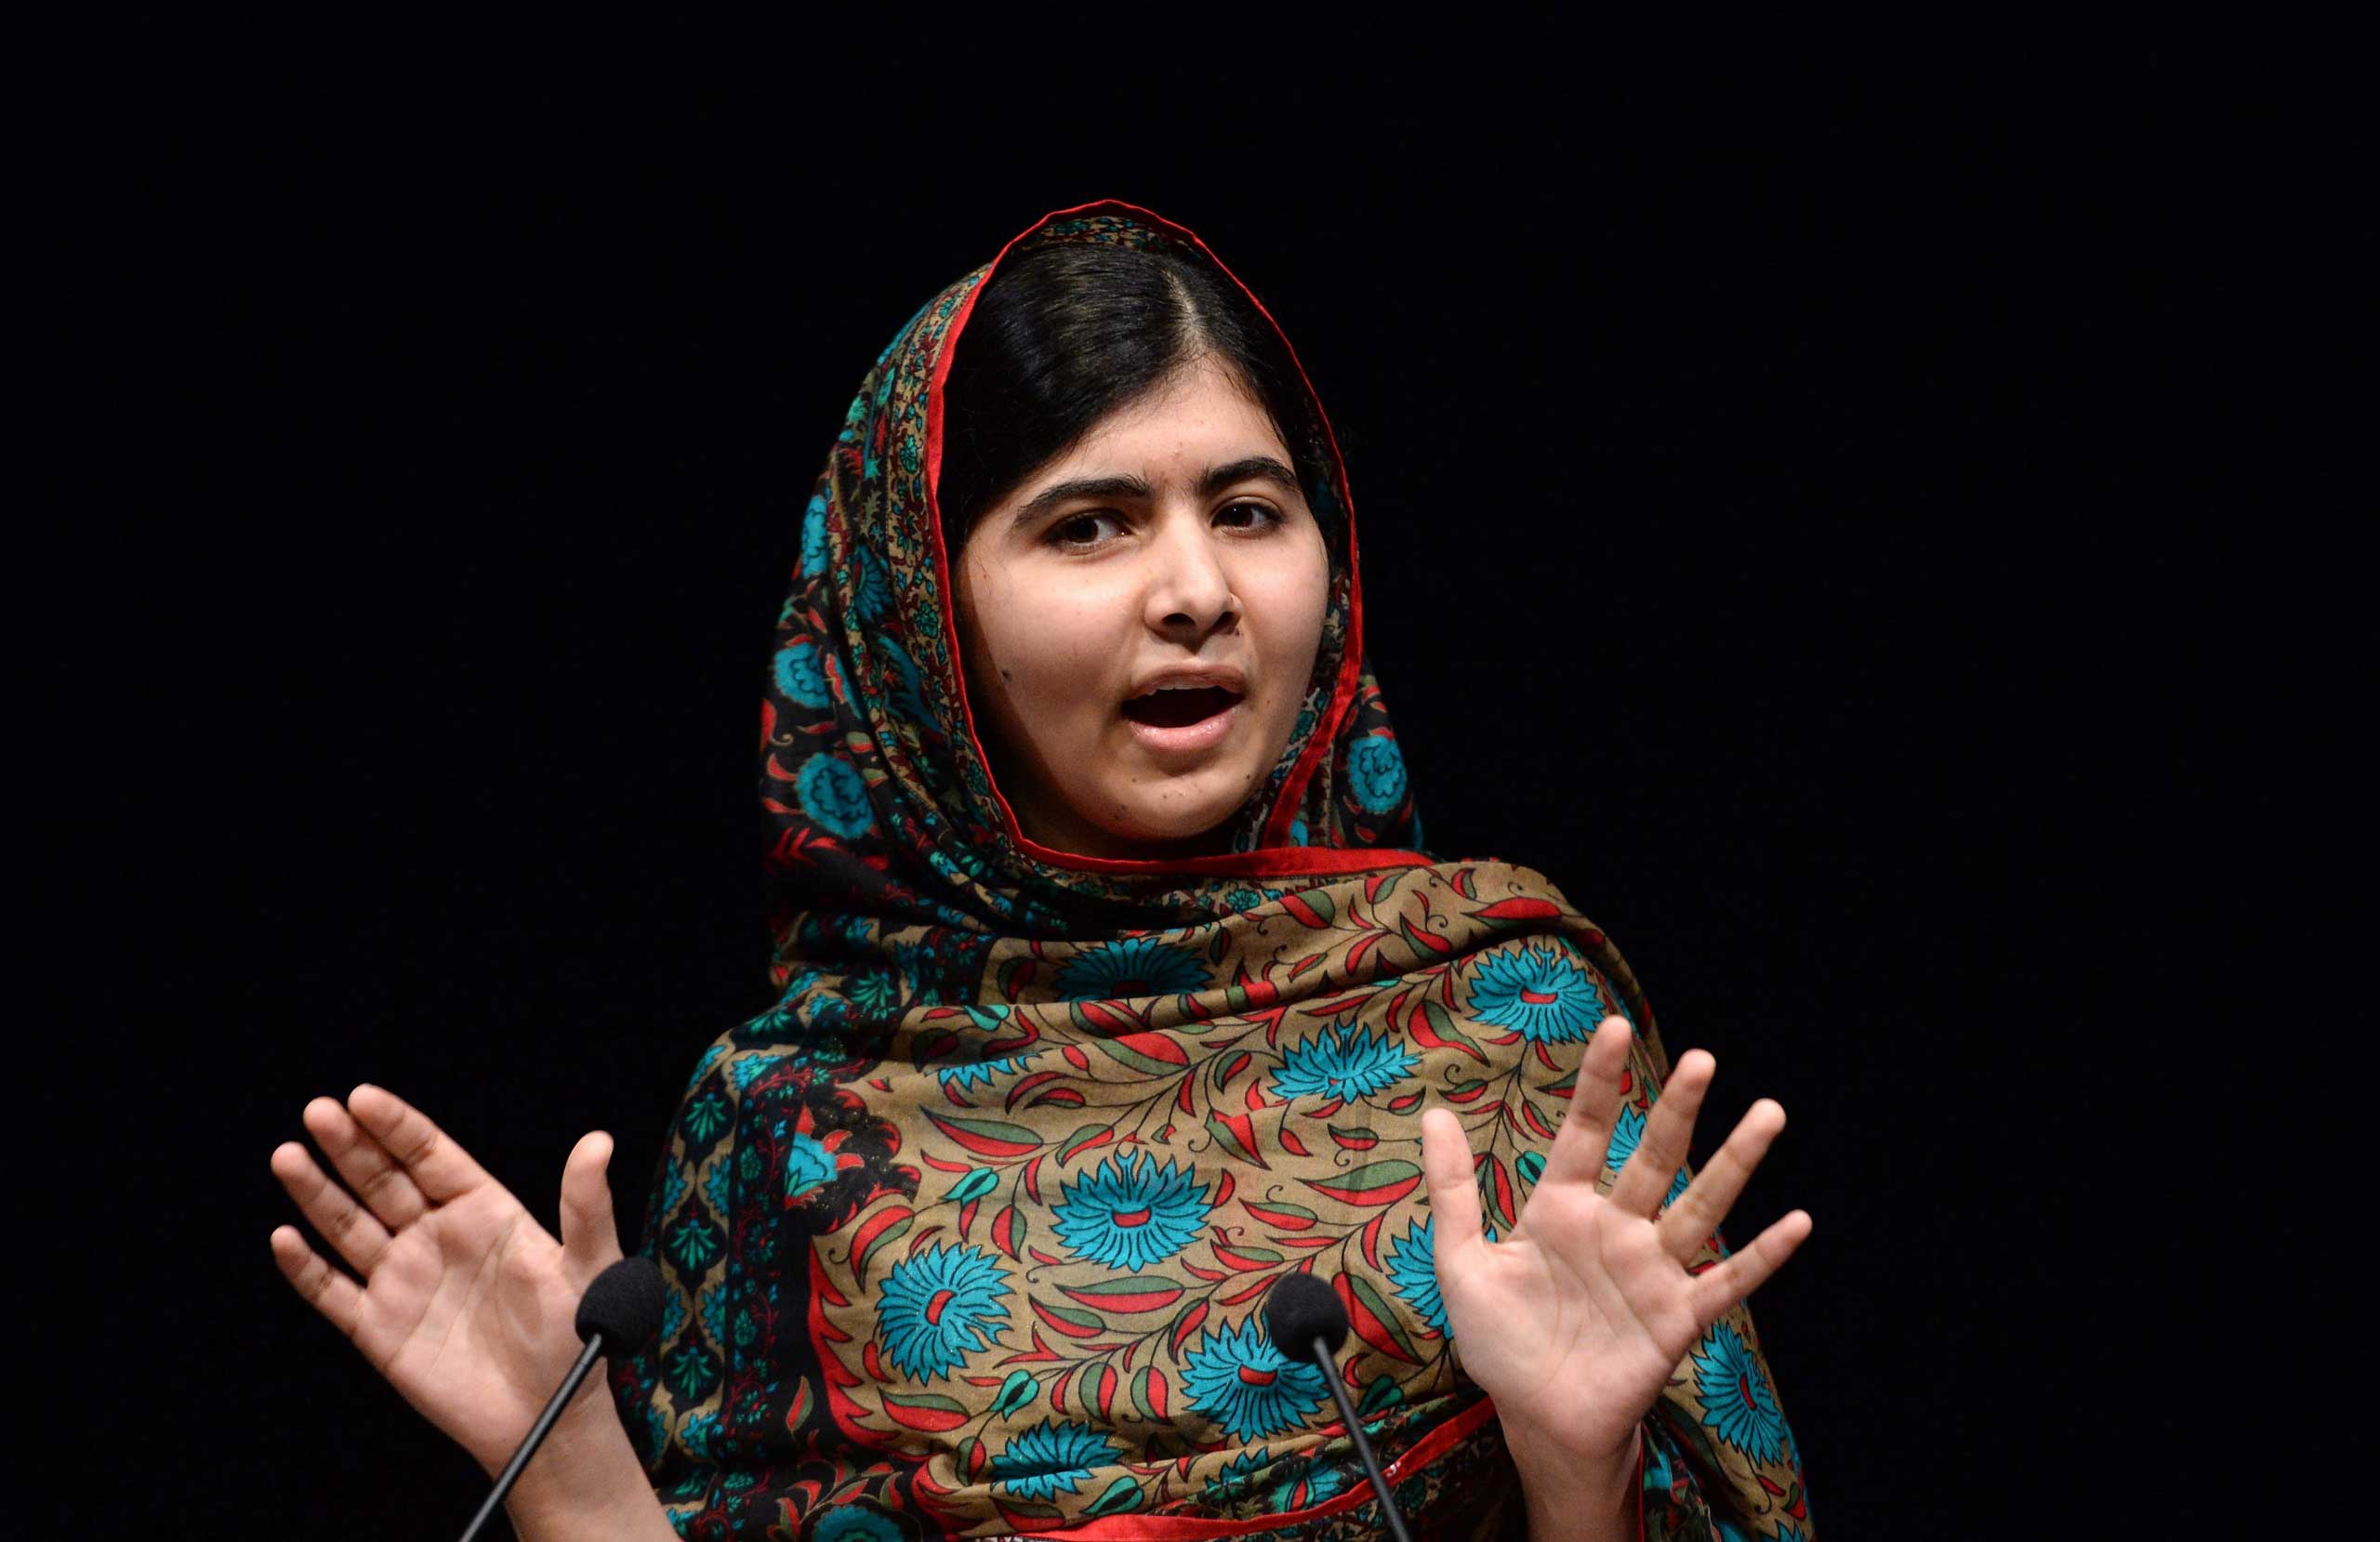 Malala Yousafzai of Pakistan delivers a statement after winning the Nobel Peace Prize in the Library of Birmingham in Birmingham, England on Oct. 10, 2014. (Facundo Arrizabalaga—EPA)